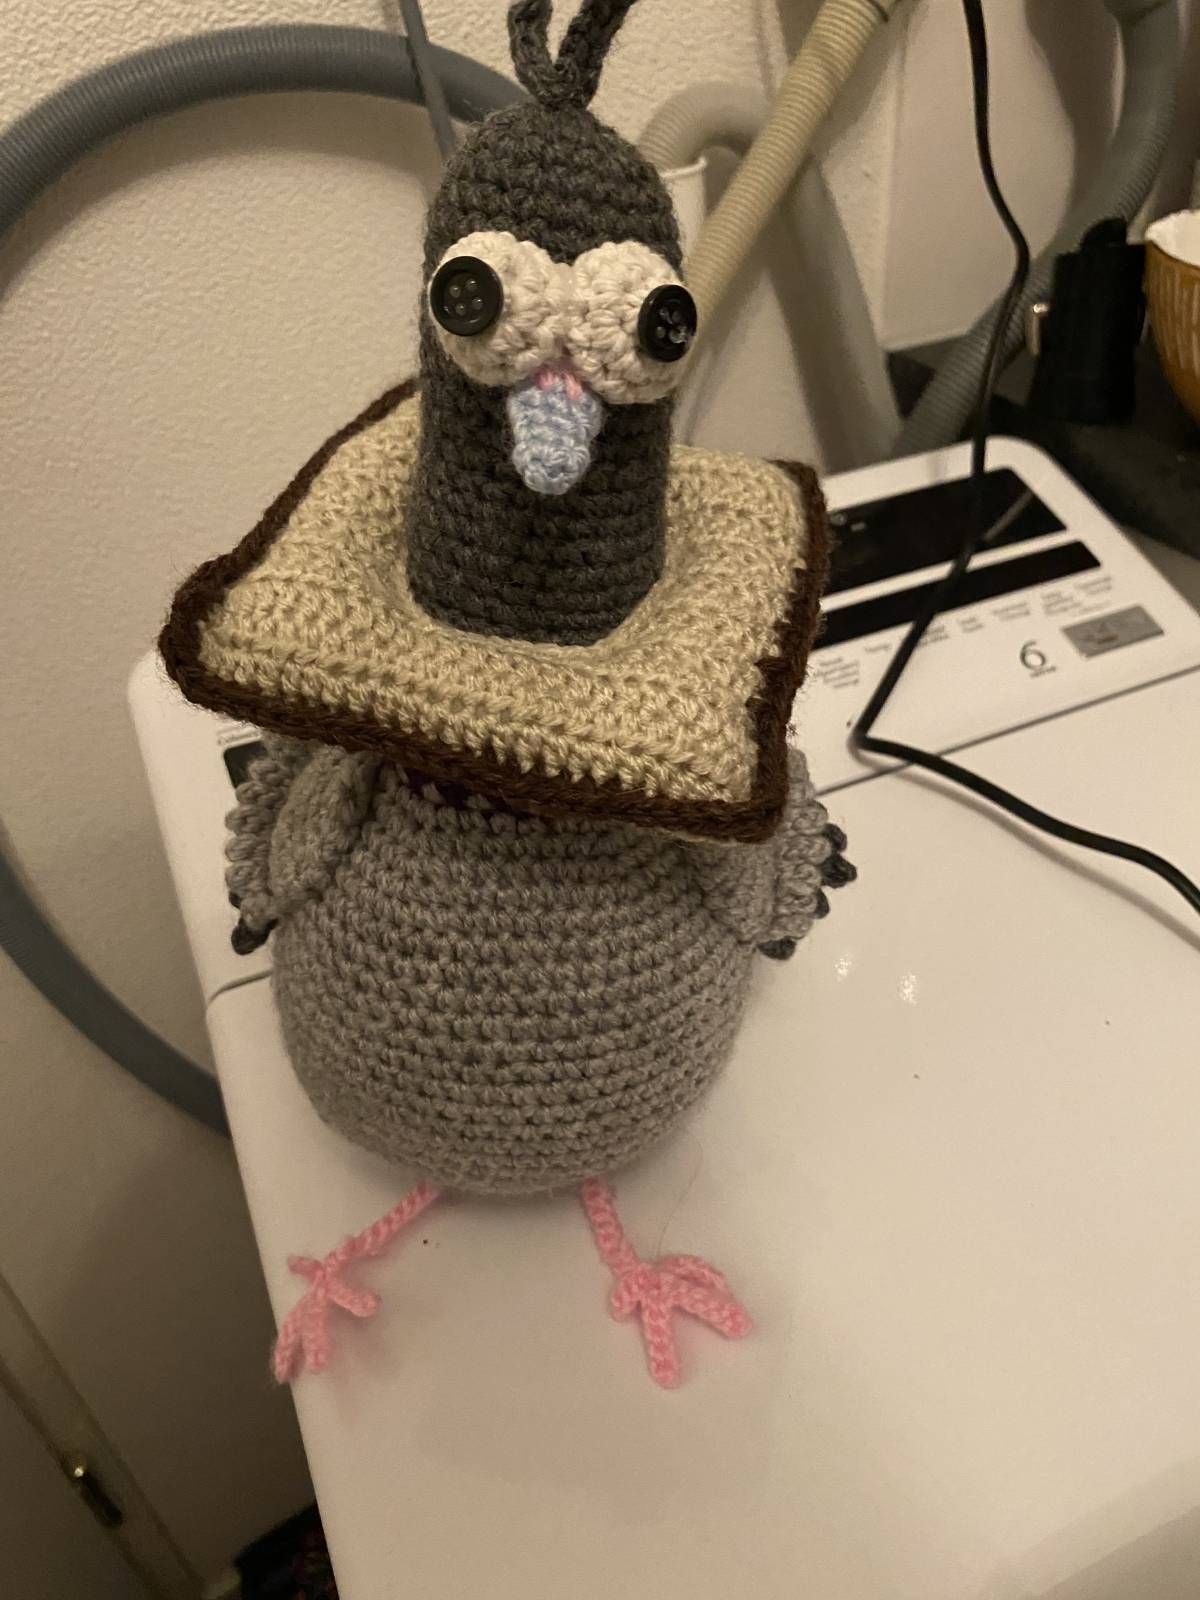 Pigeon Crochet Amigurumi Pattern Review by Ean Van der sman for Cottontail Whiskers